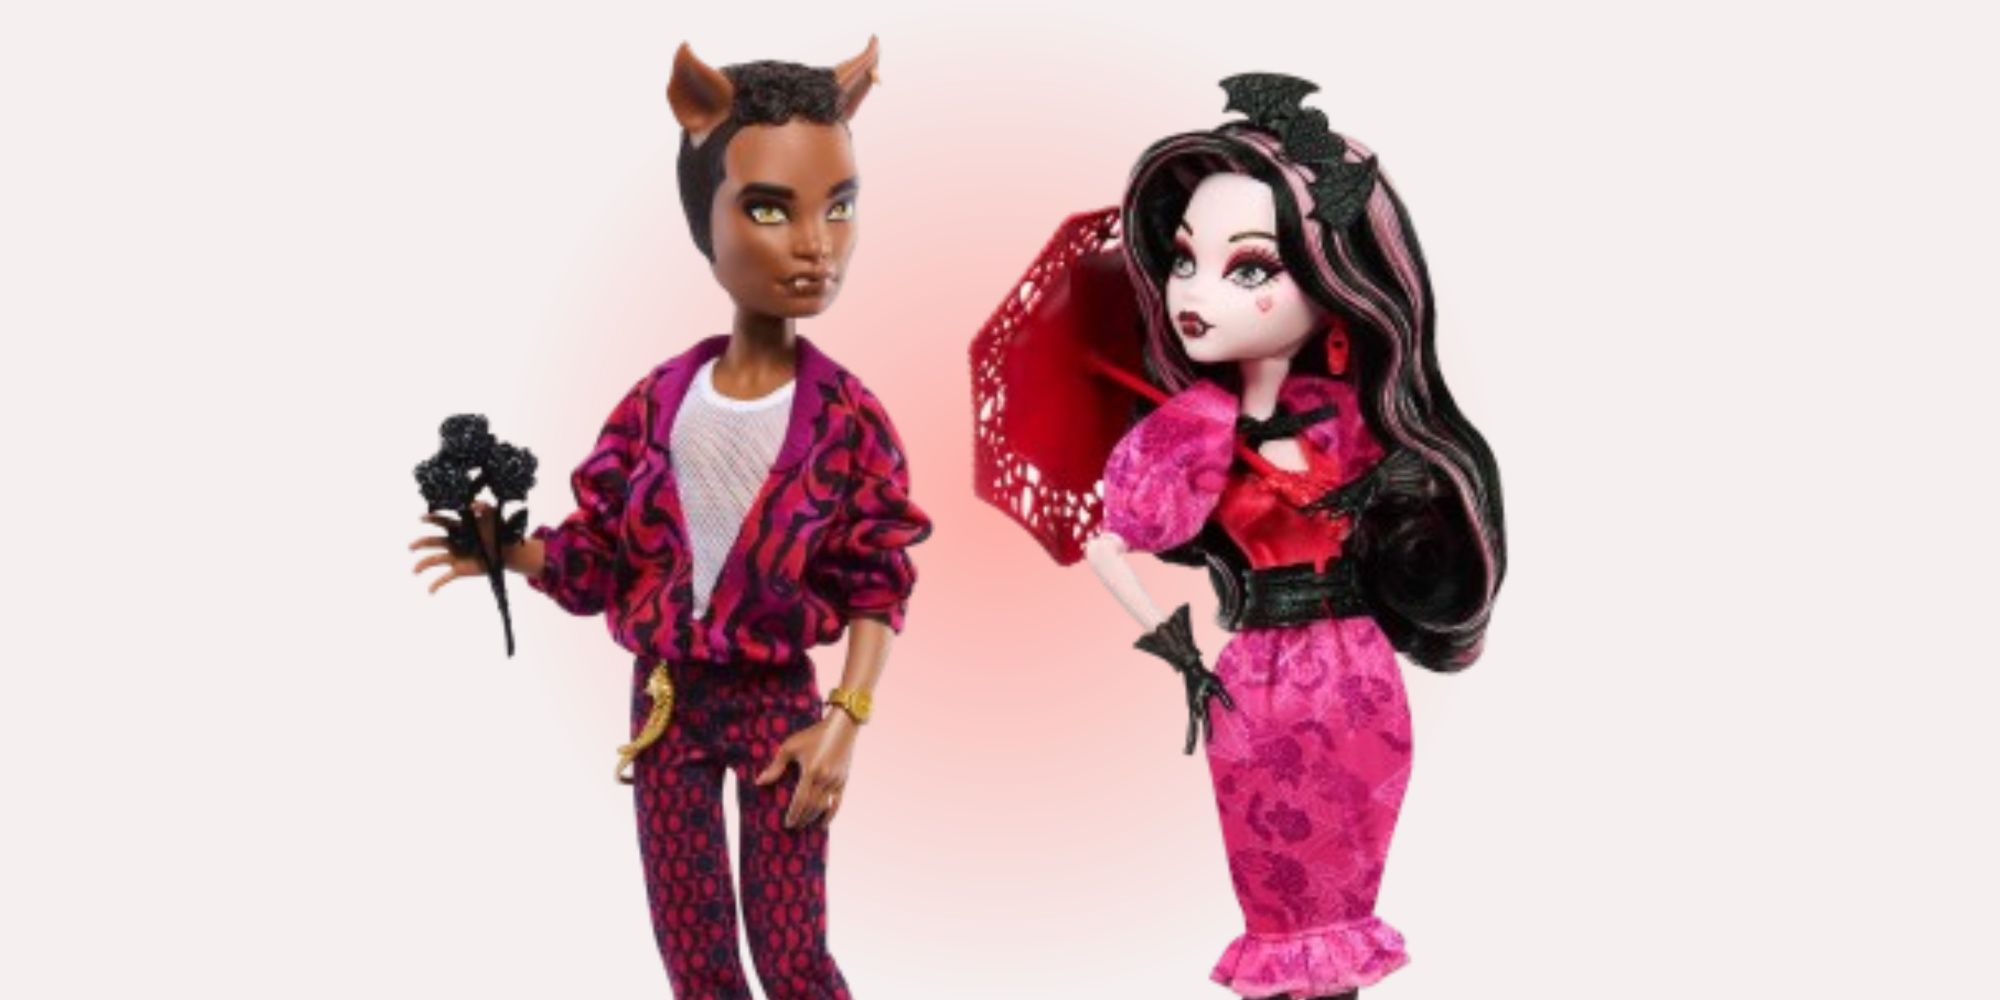 Clawd Wolf and Draculaura Howliday Love edition collector dolls on a gradient background